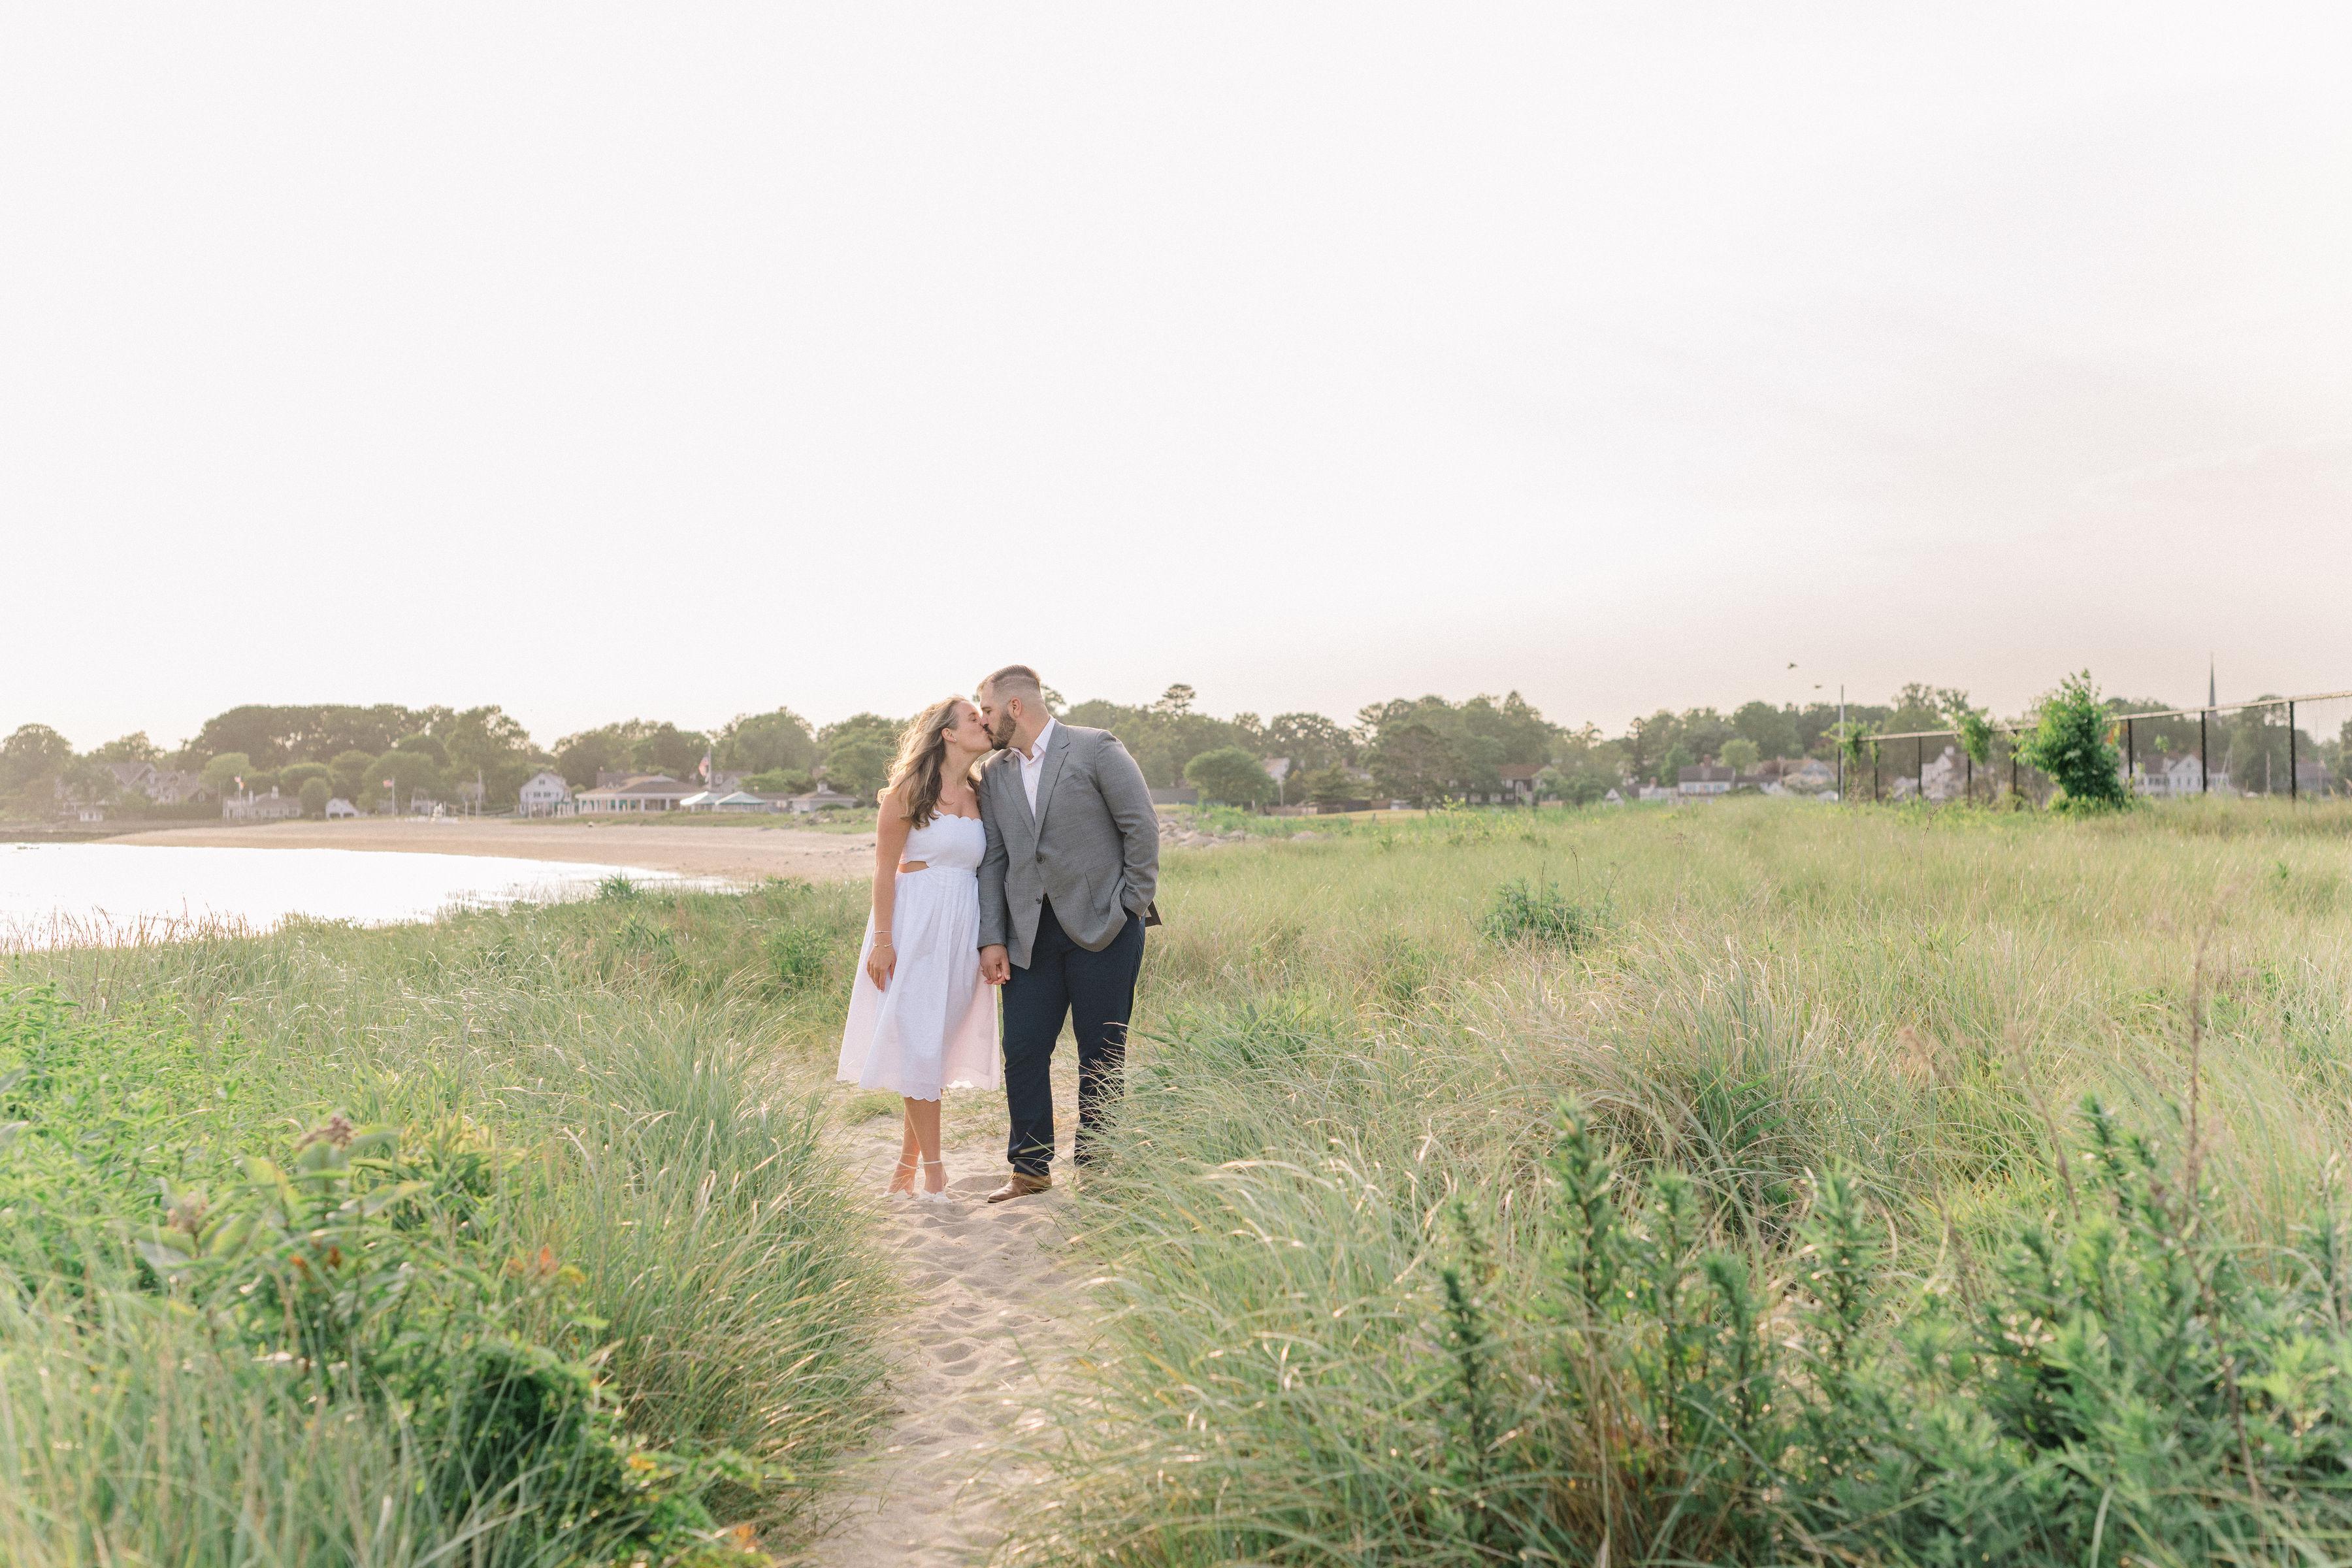 The Wedding Website of Caitlin Cannella and Kyle Santorine